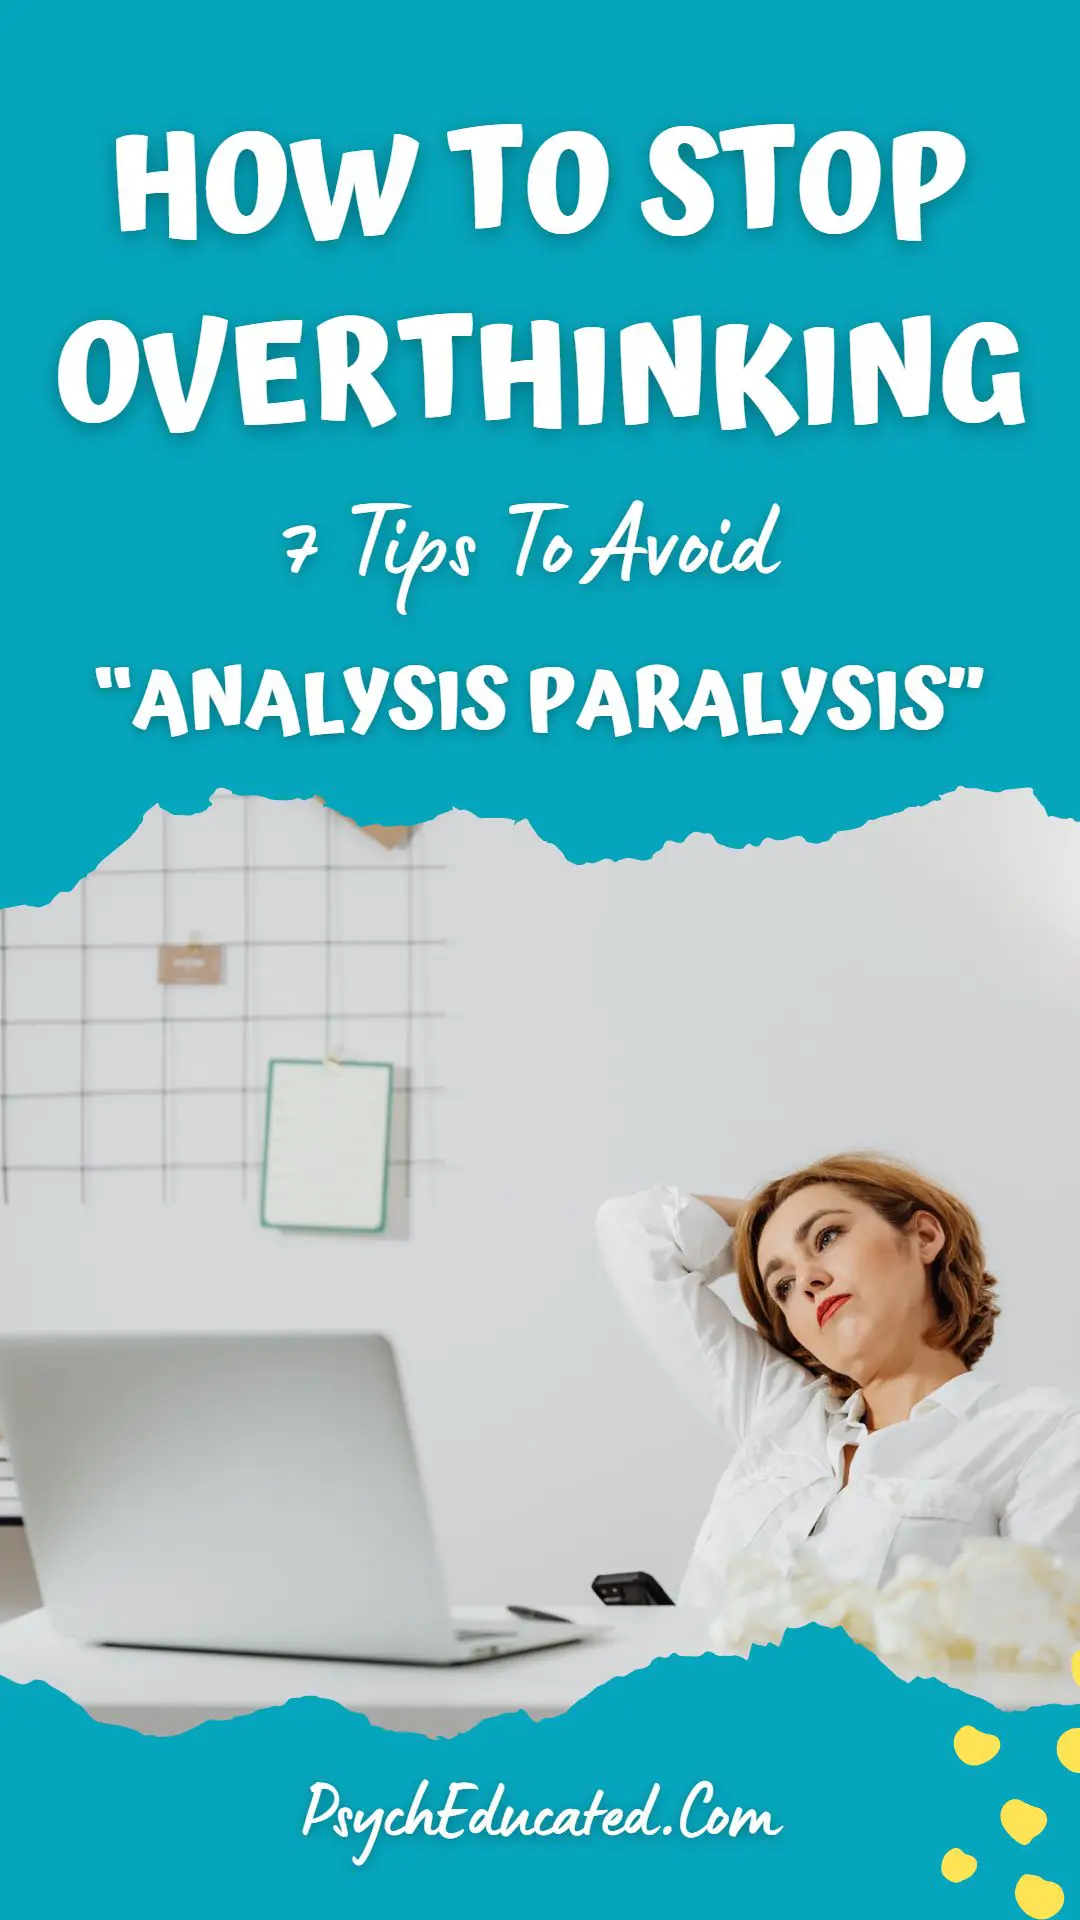 How to stop overthinking and avoid “Analysis Paralysis”